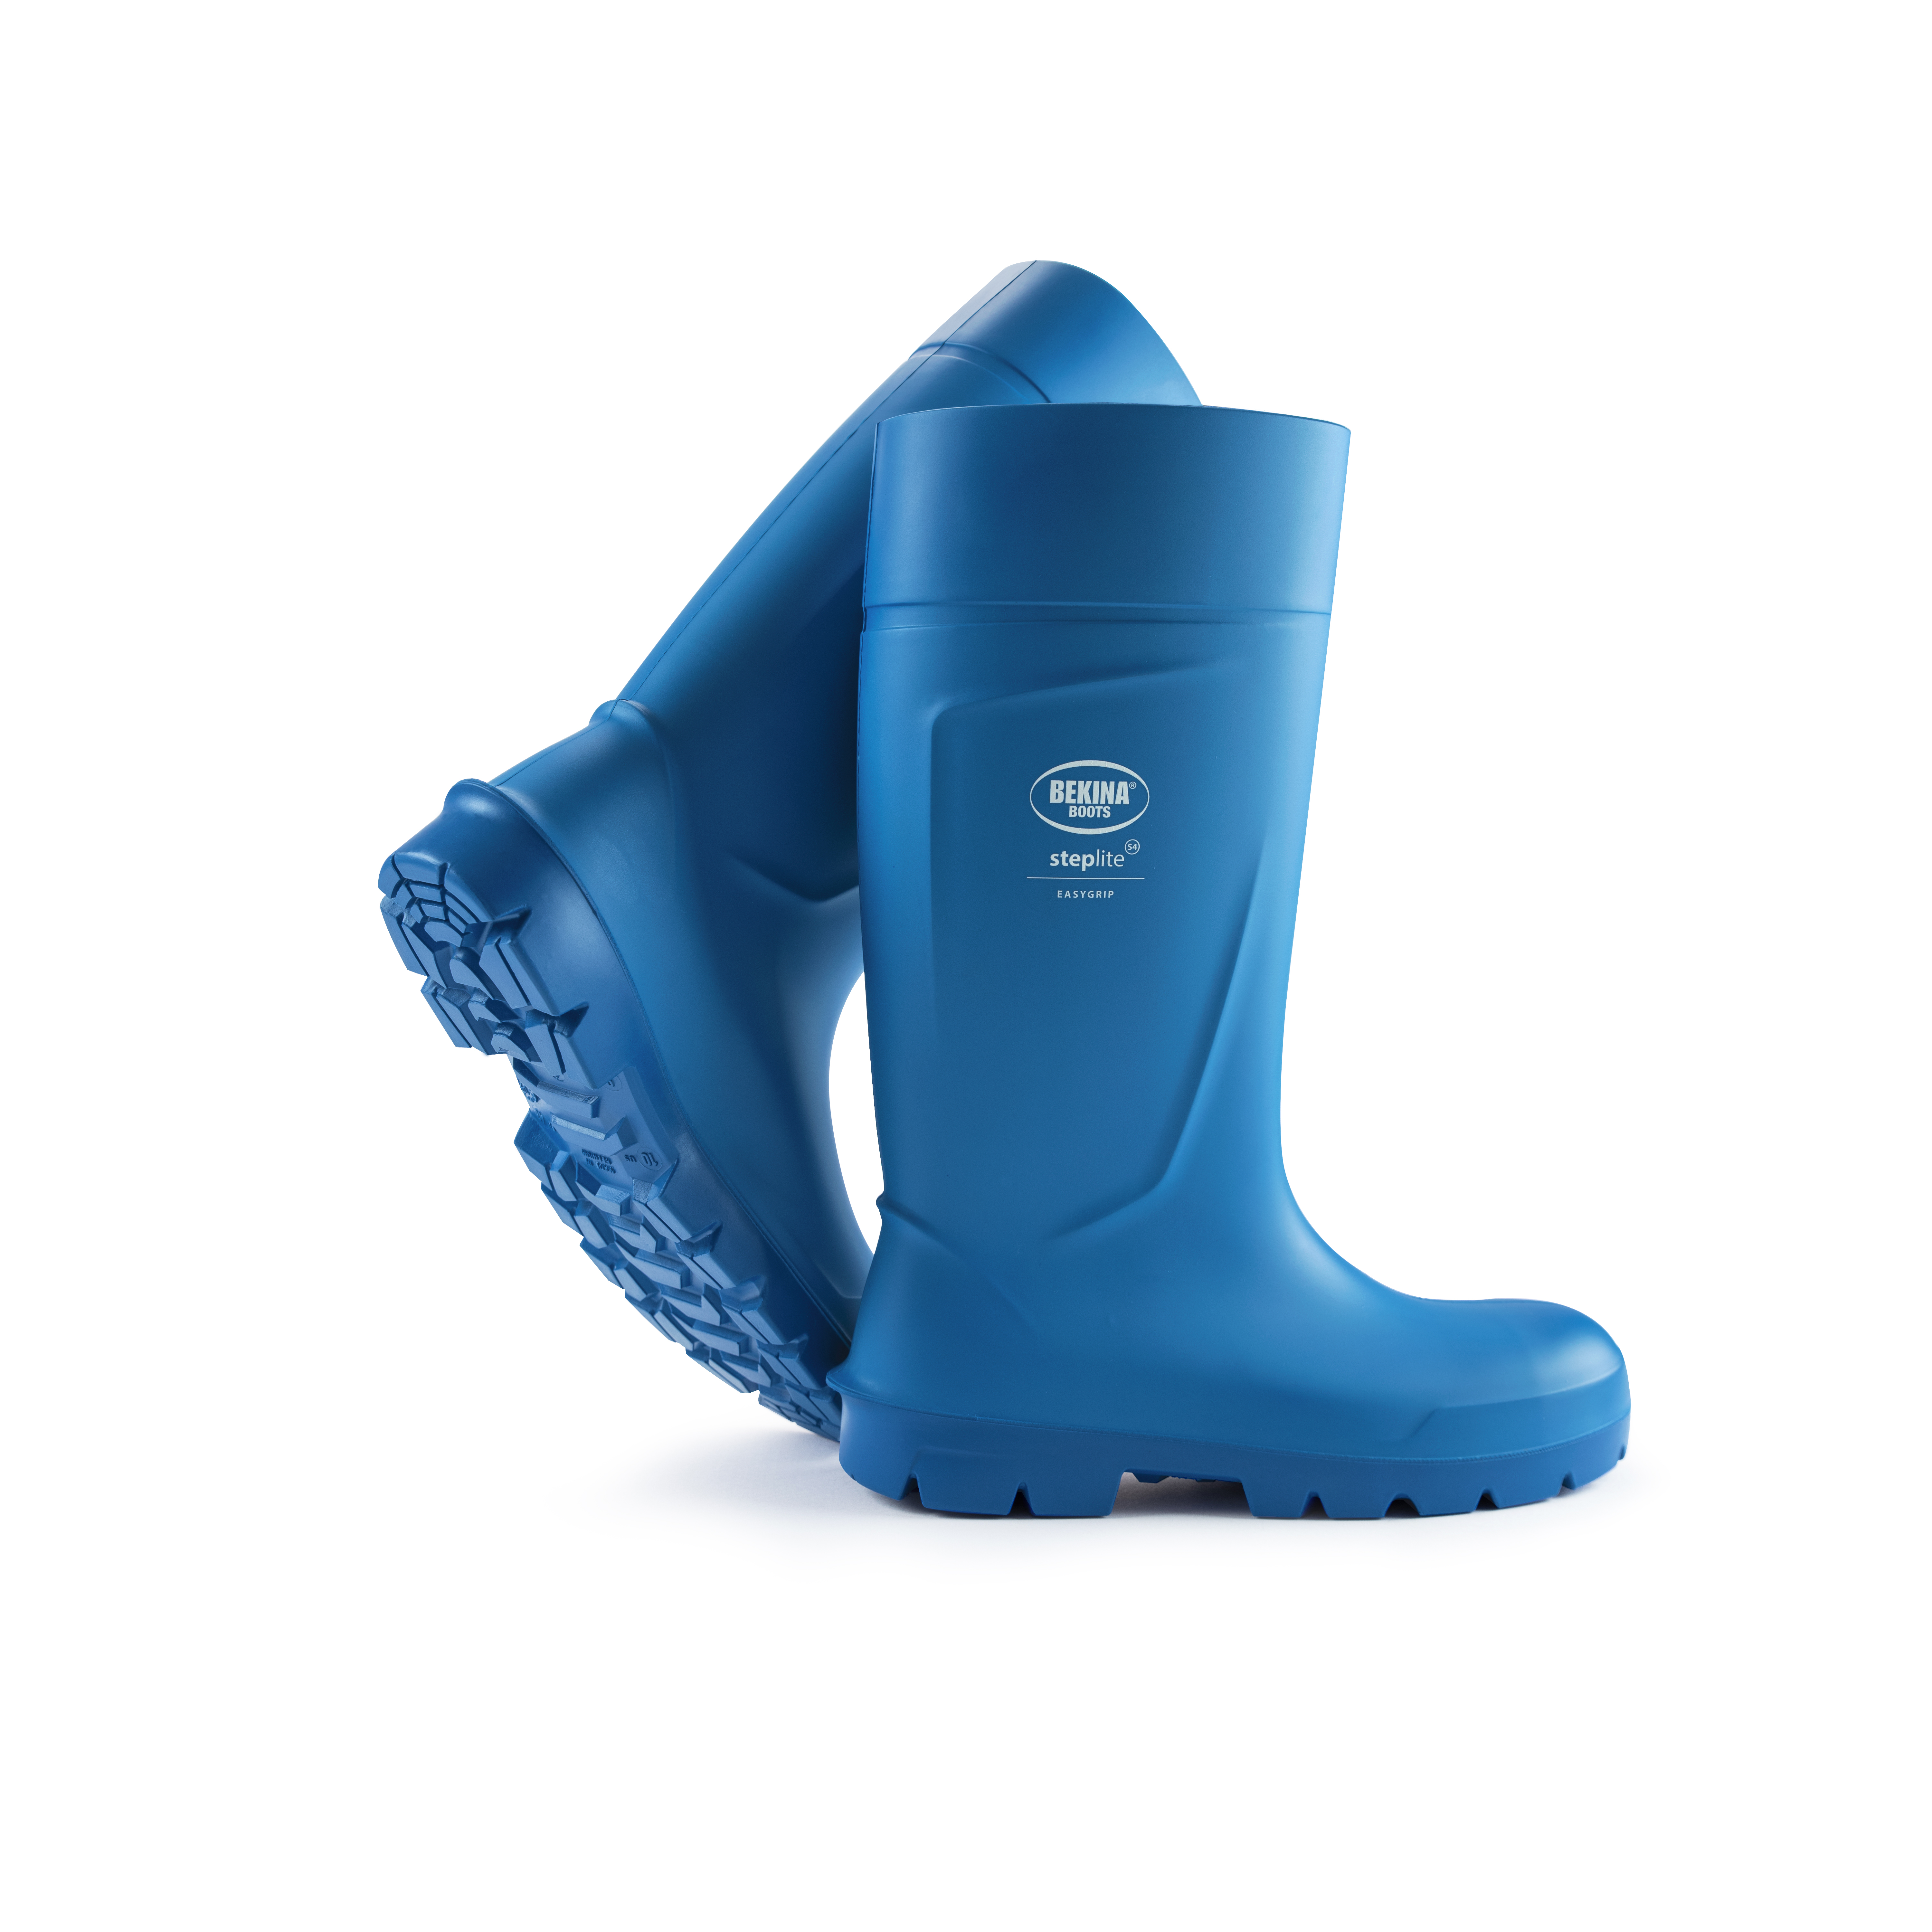 Pro Thermal Insulated Food Hygiene Abattoir Work Safety Wellington Boots Wellies 